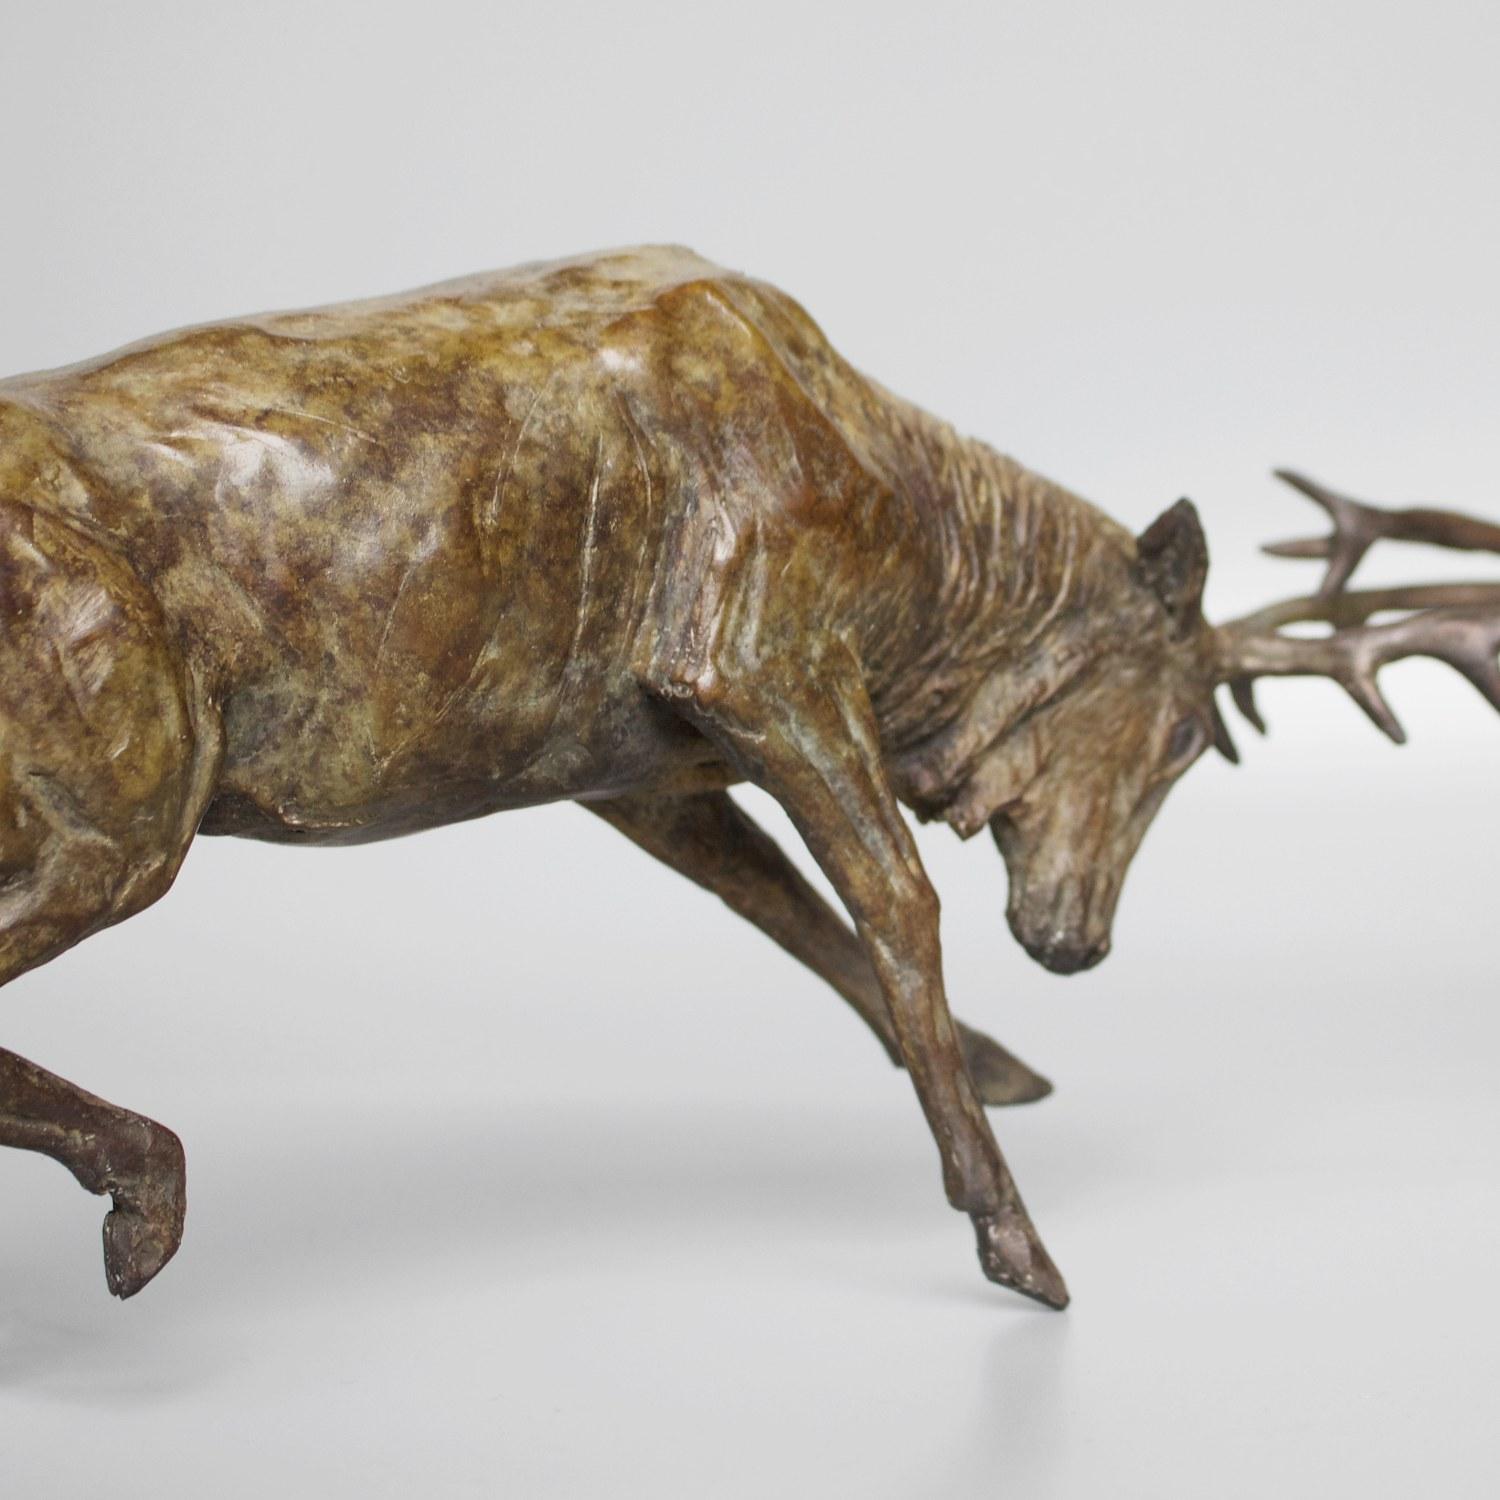 A contemporary bronze sculpture of two fighting stags by Artist Jenna Gearing. Rich brown patination and fine hand finished detail. Limited edition 2/12. Signed JG to bronze.

Jenna Gearing is a contemporary sculptor who's interest in history and